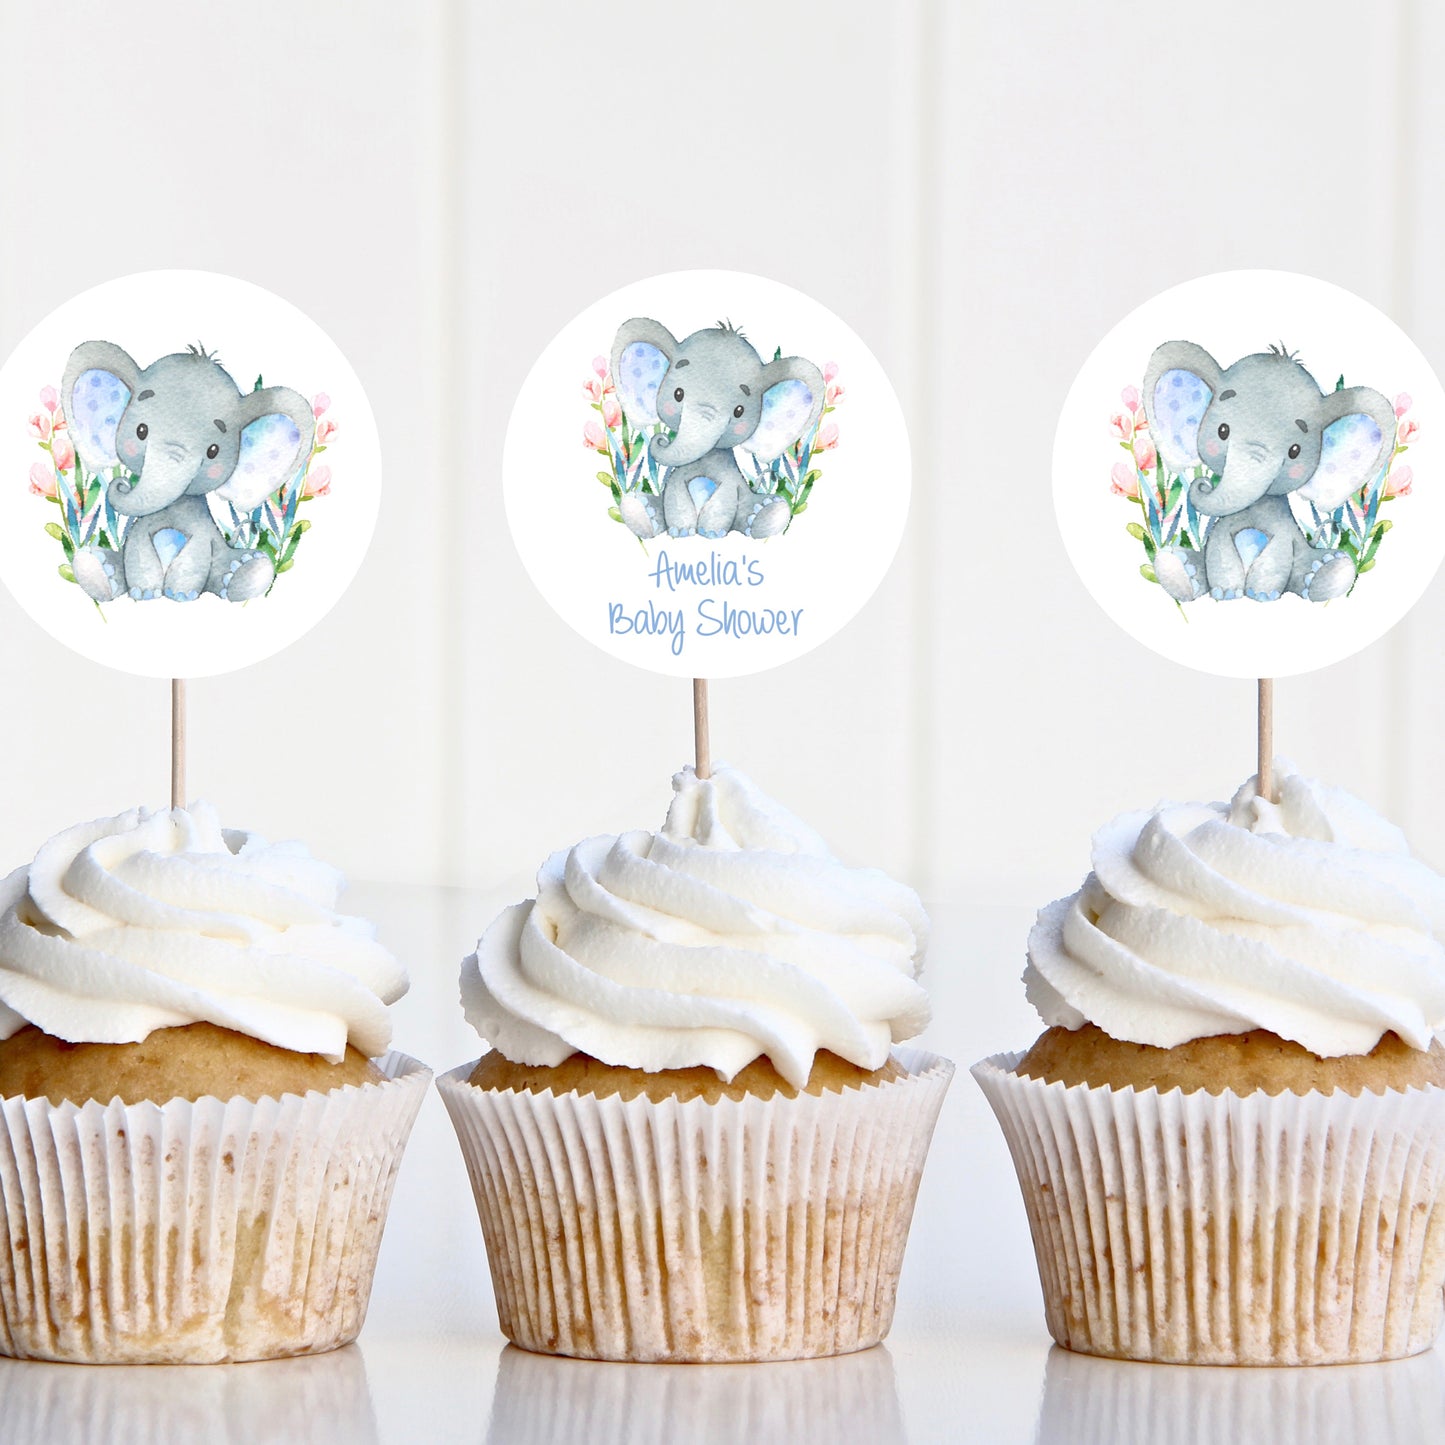 12 x Personalised Cupcake Toppers Baby Shower Watercolour Elephant Blue